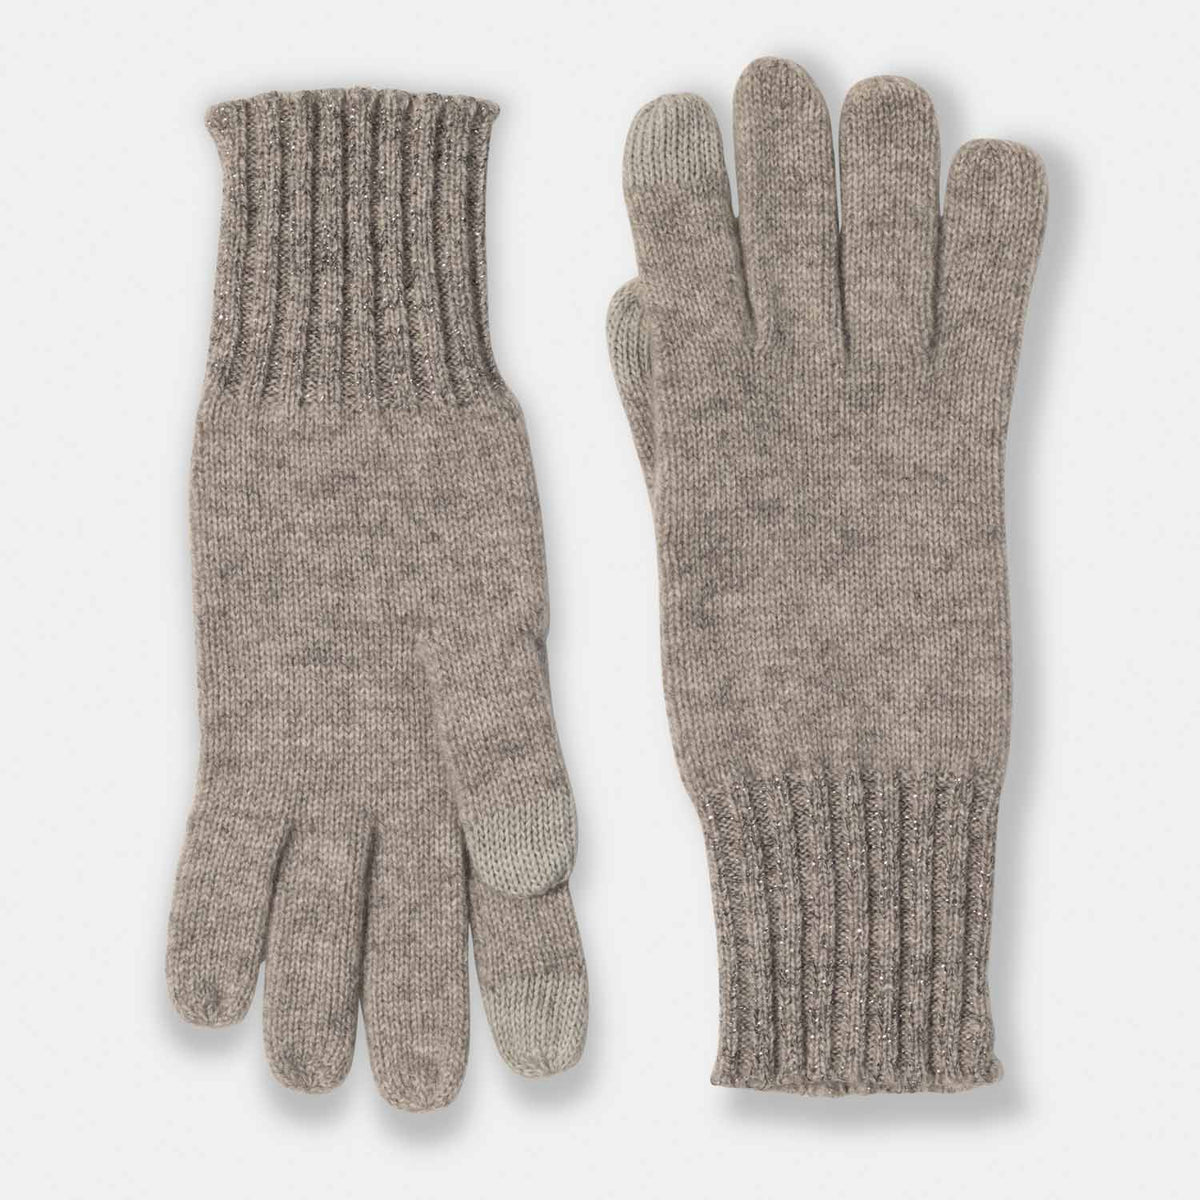 Picture of cashmere knit glove with shiny lurex cuff detail, grey